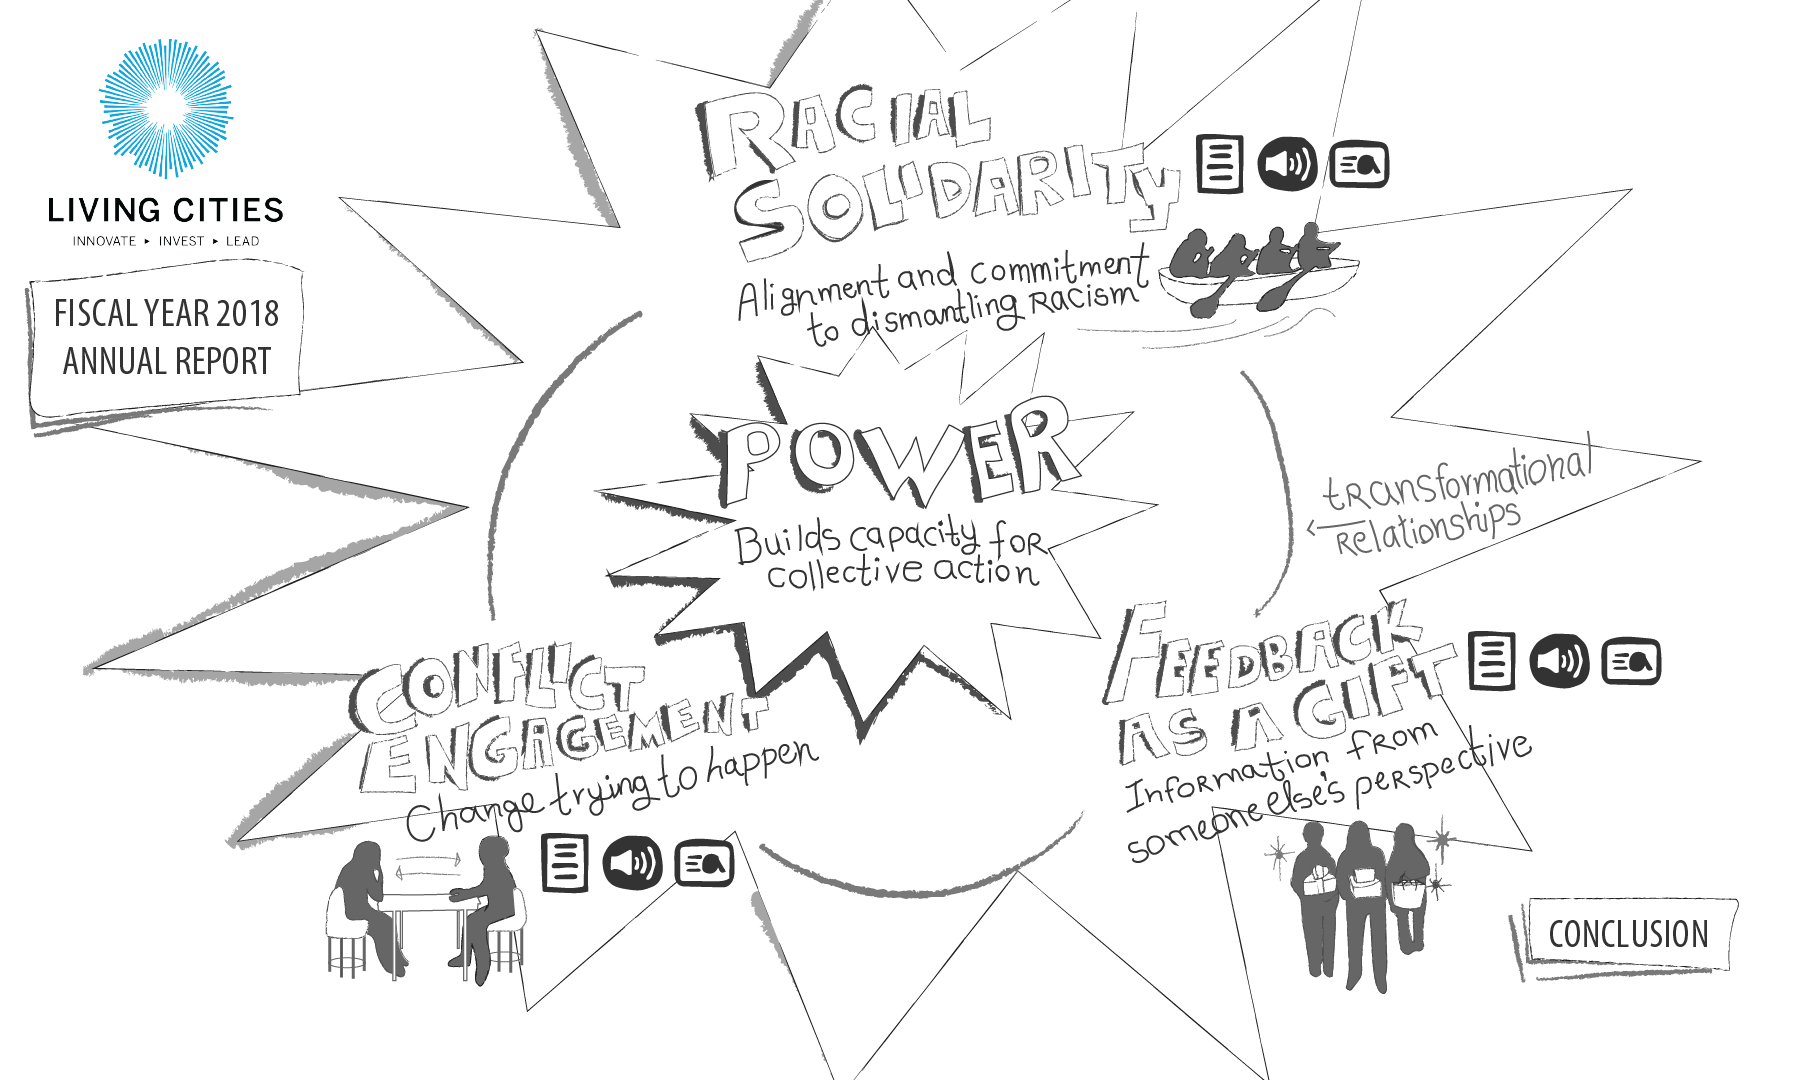 Pencil drawing illustrating a framework for racial equity; racial solidarity, feedback as a gift, and conflict engagement circle power, all on top of a sun.